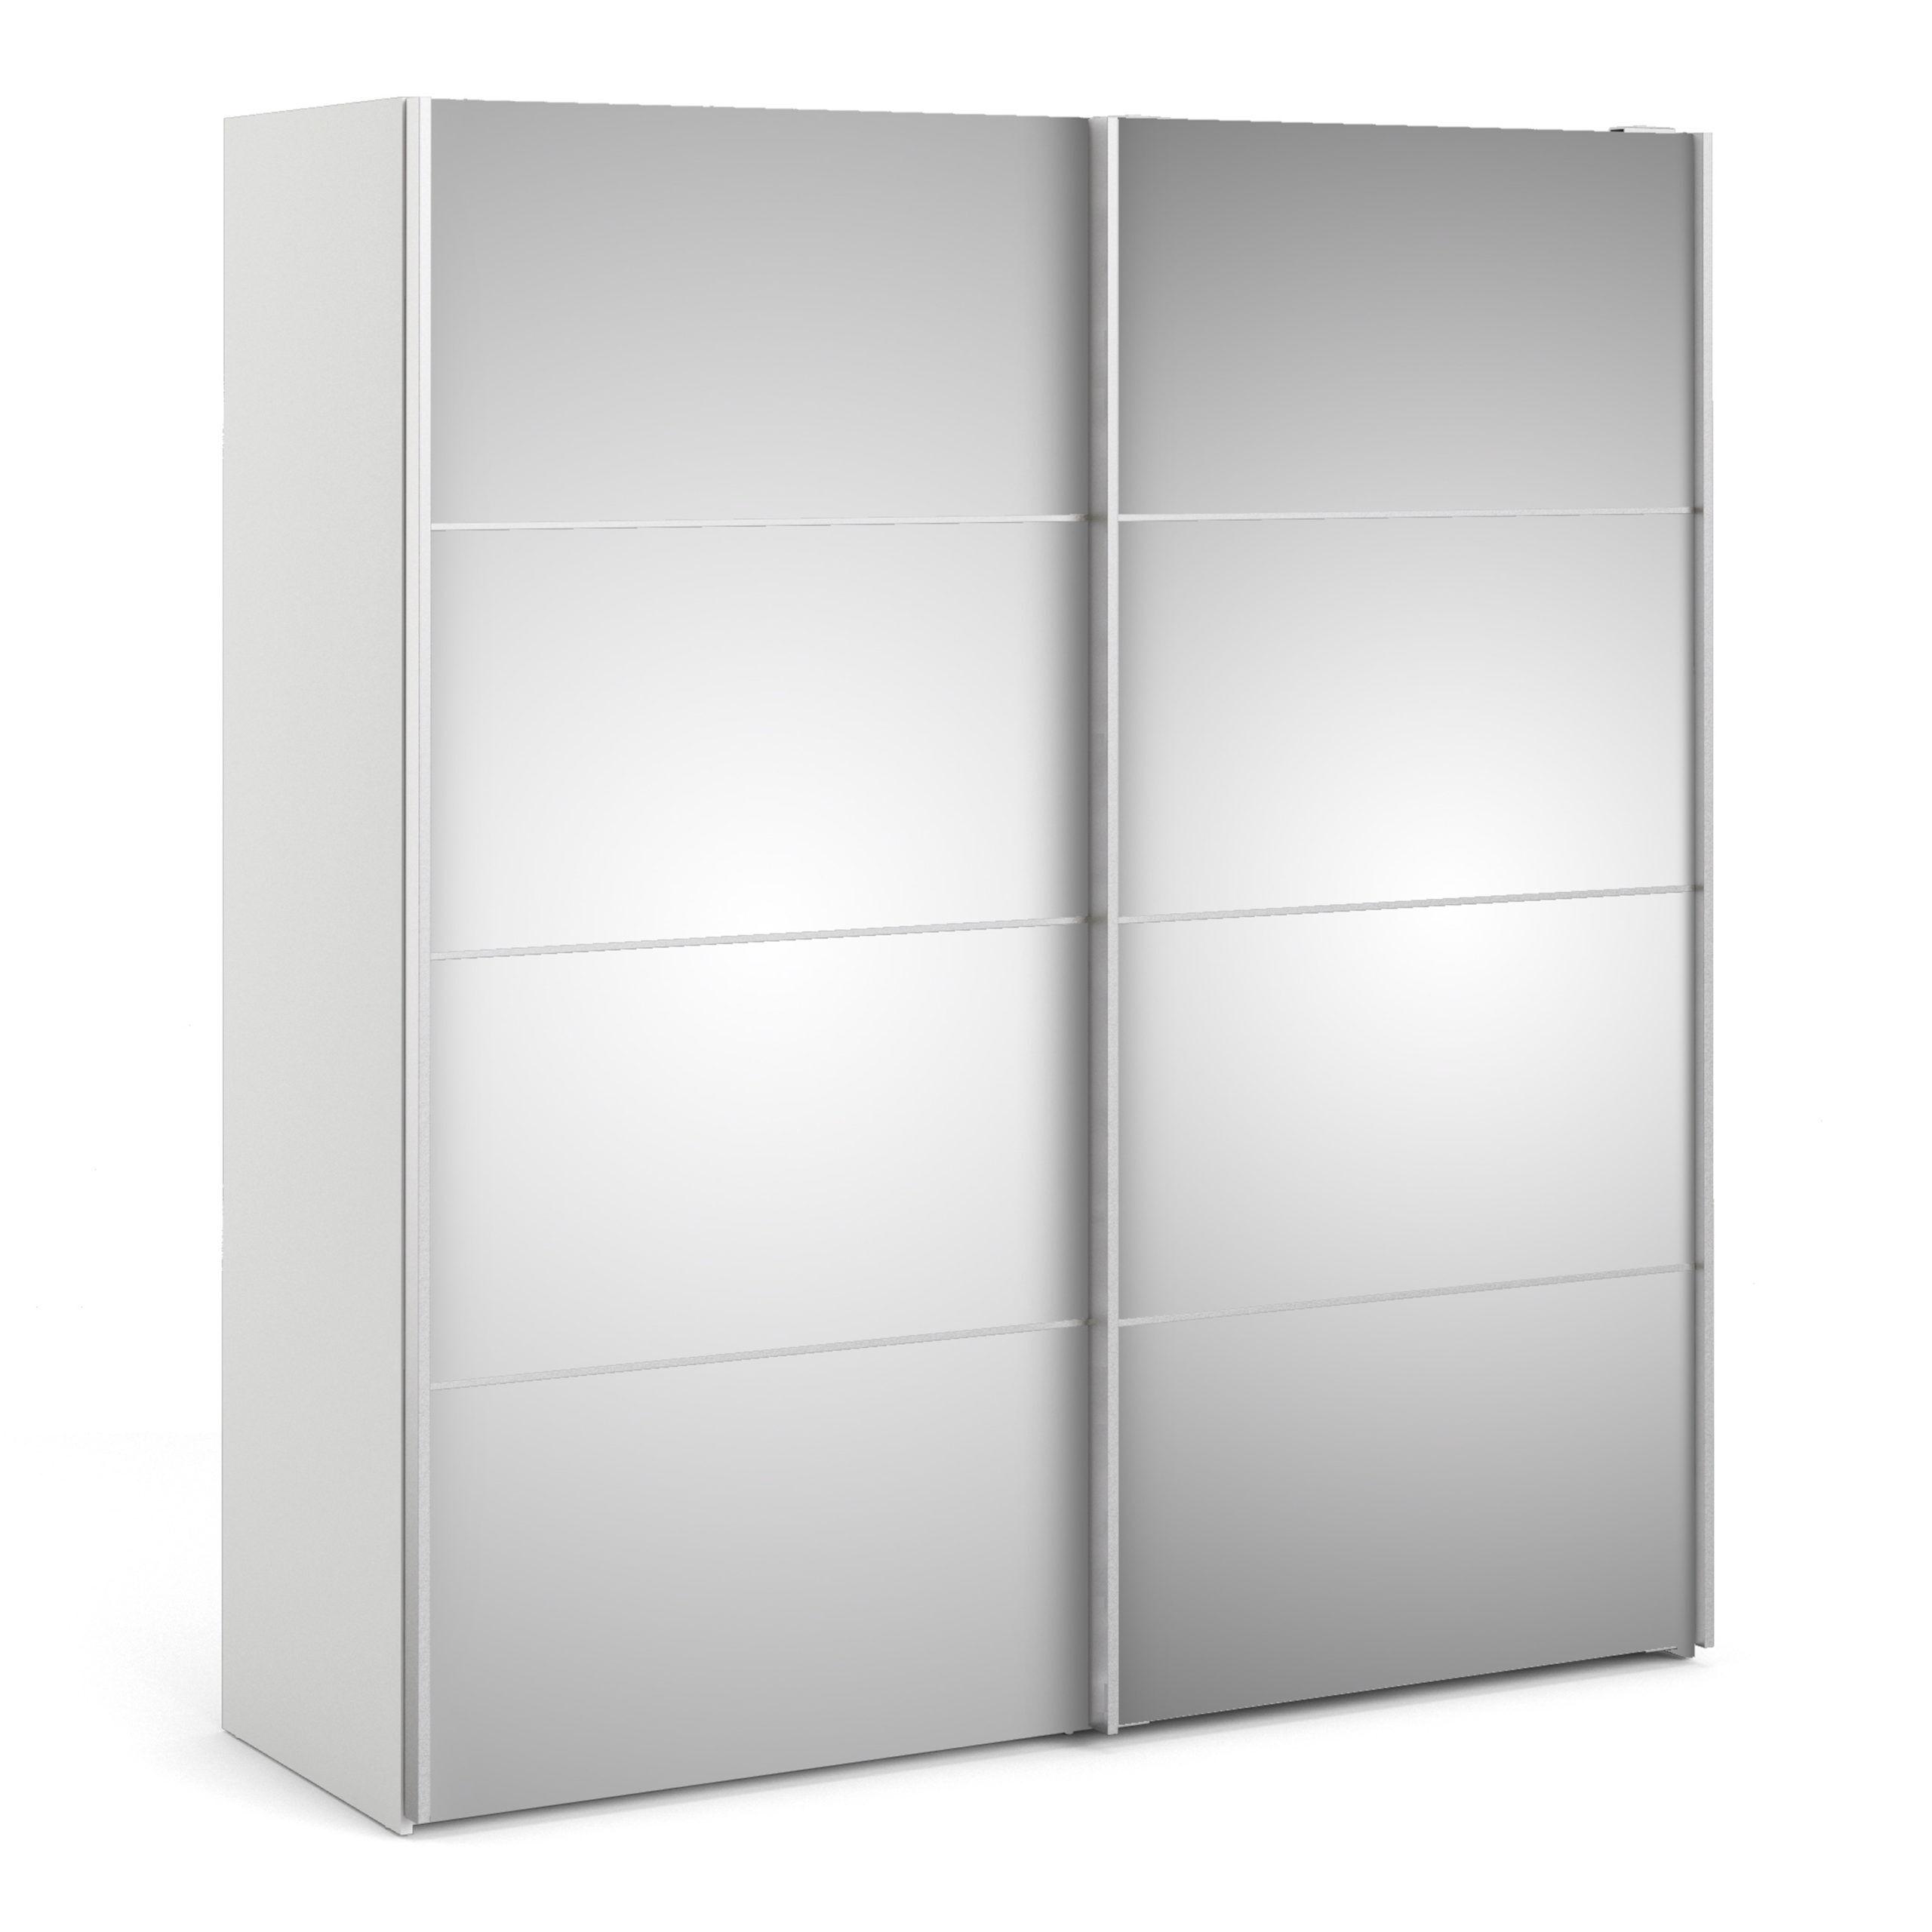 Venice Wardrobe Collection Sliding Wardrobe 180cm in White with Mirror Doors with 2 Shelves   Self Assembly